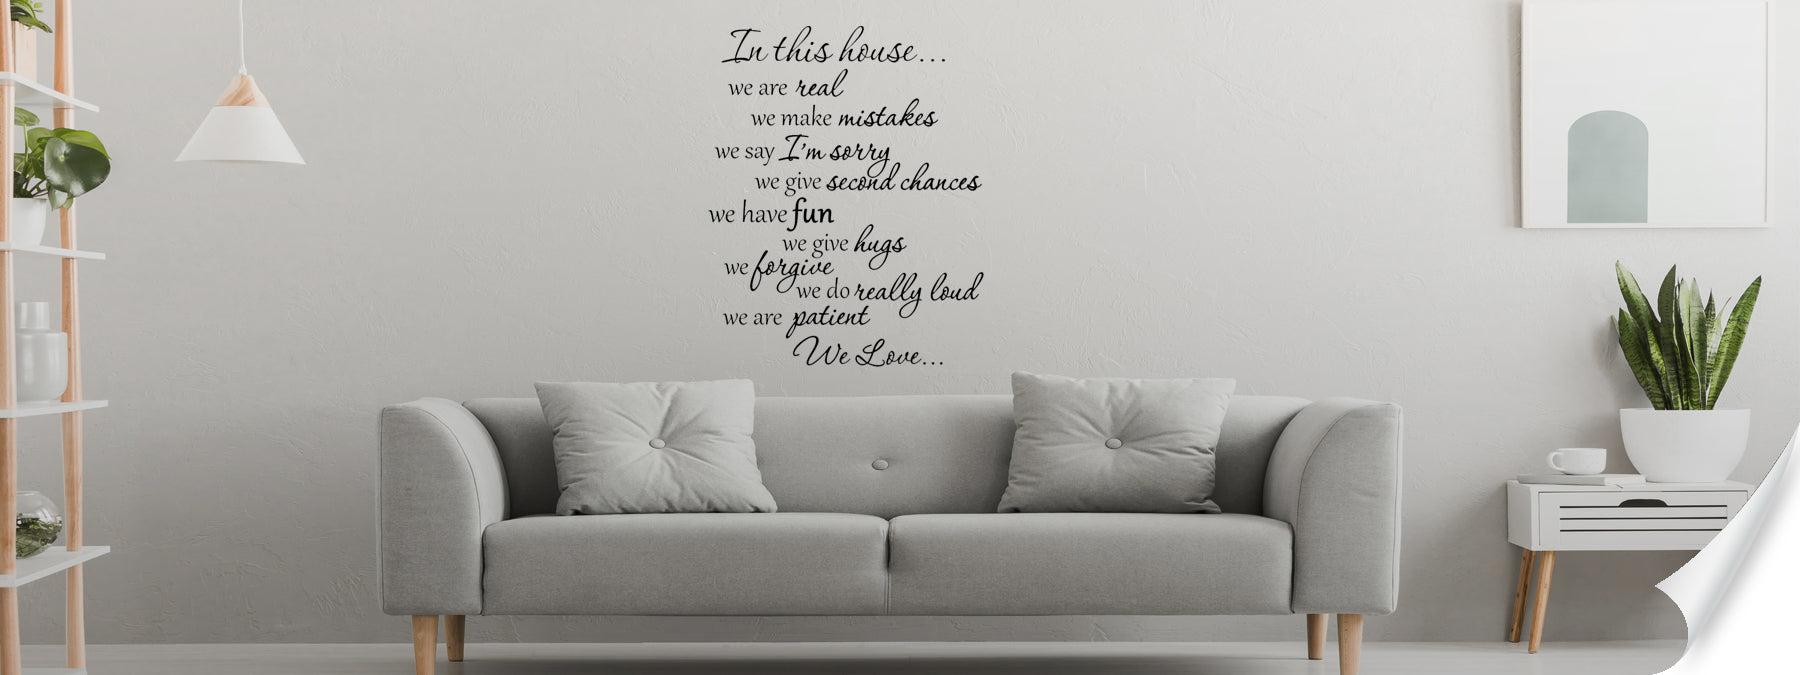 Inspirational Wall Decals and Quotes